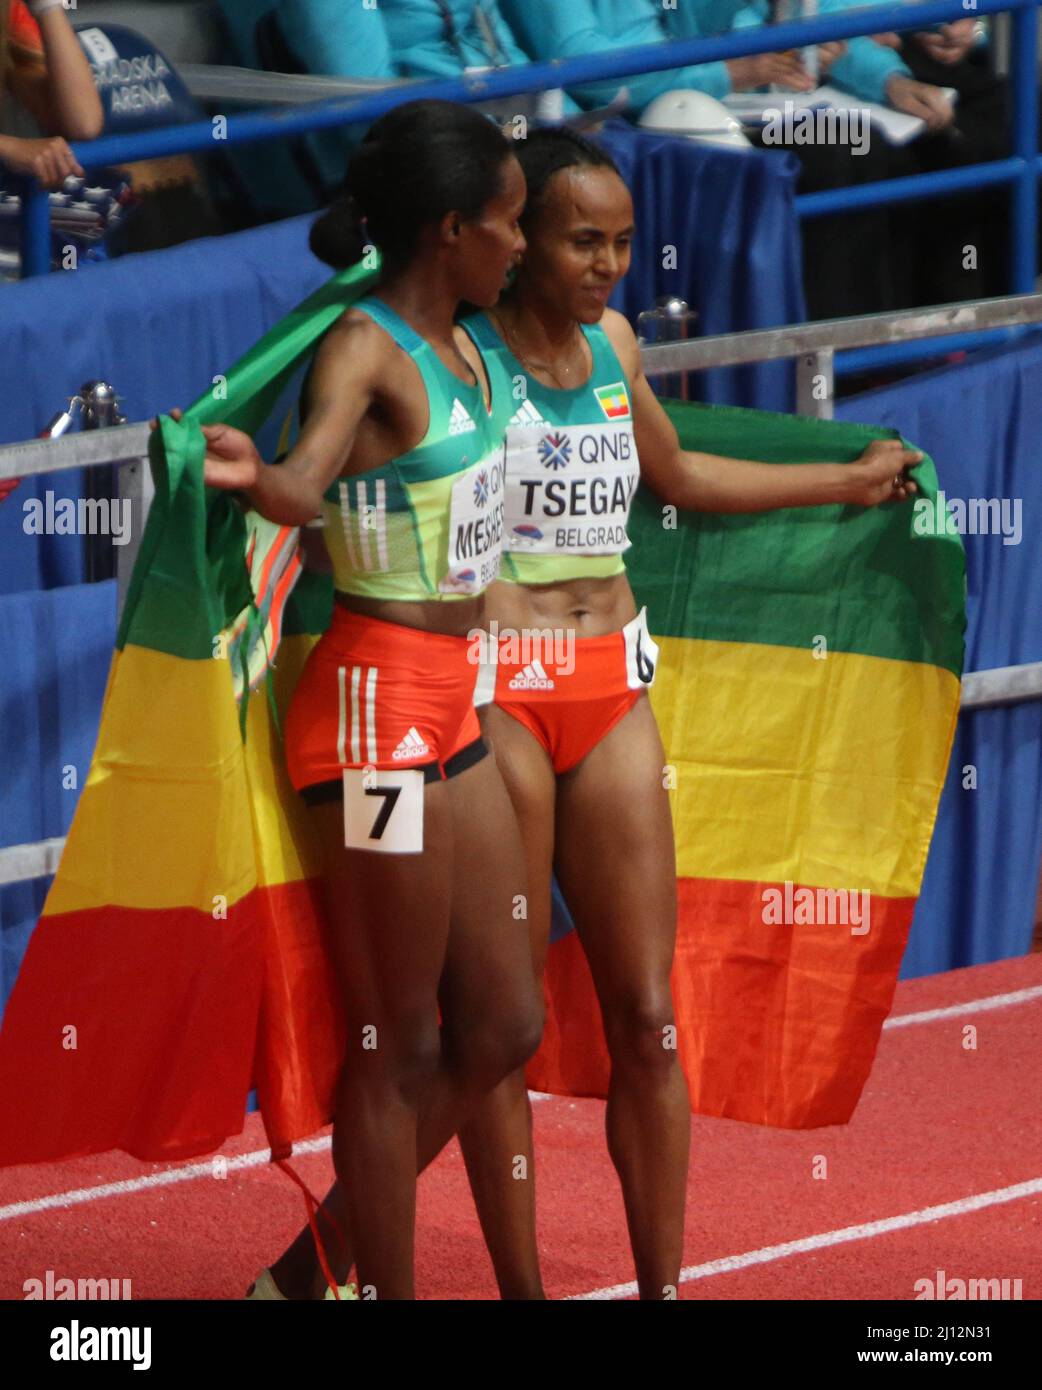 Gudaf TSEGAY and Axumawit EMBAYE of Ethiopie Finale 1500 M Women during the World Athletics Indoor Championships 2022 on March 19, 2022 at Stark Arena in Belgrade, Serbia. Photo by Laurent Lairys/ABACAPRESS.COM Stock Photo